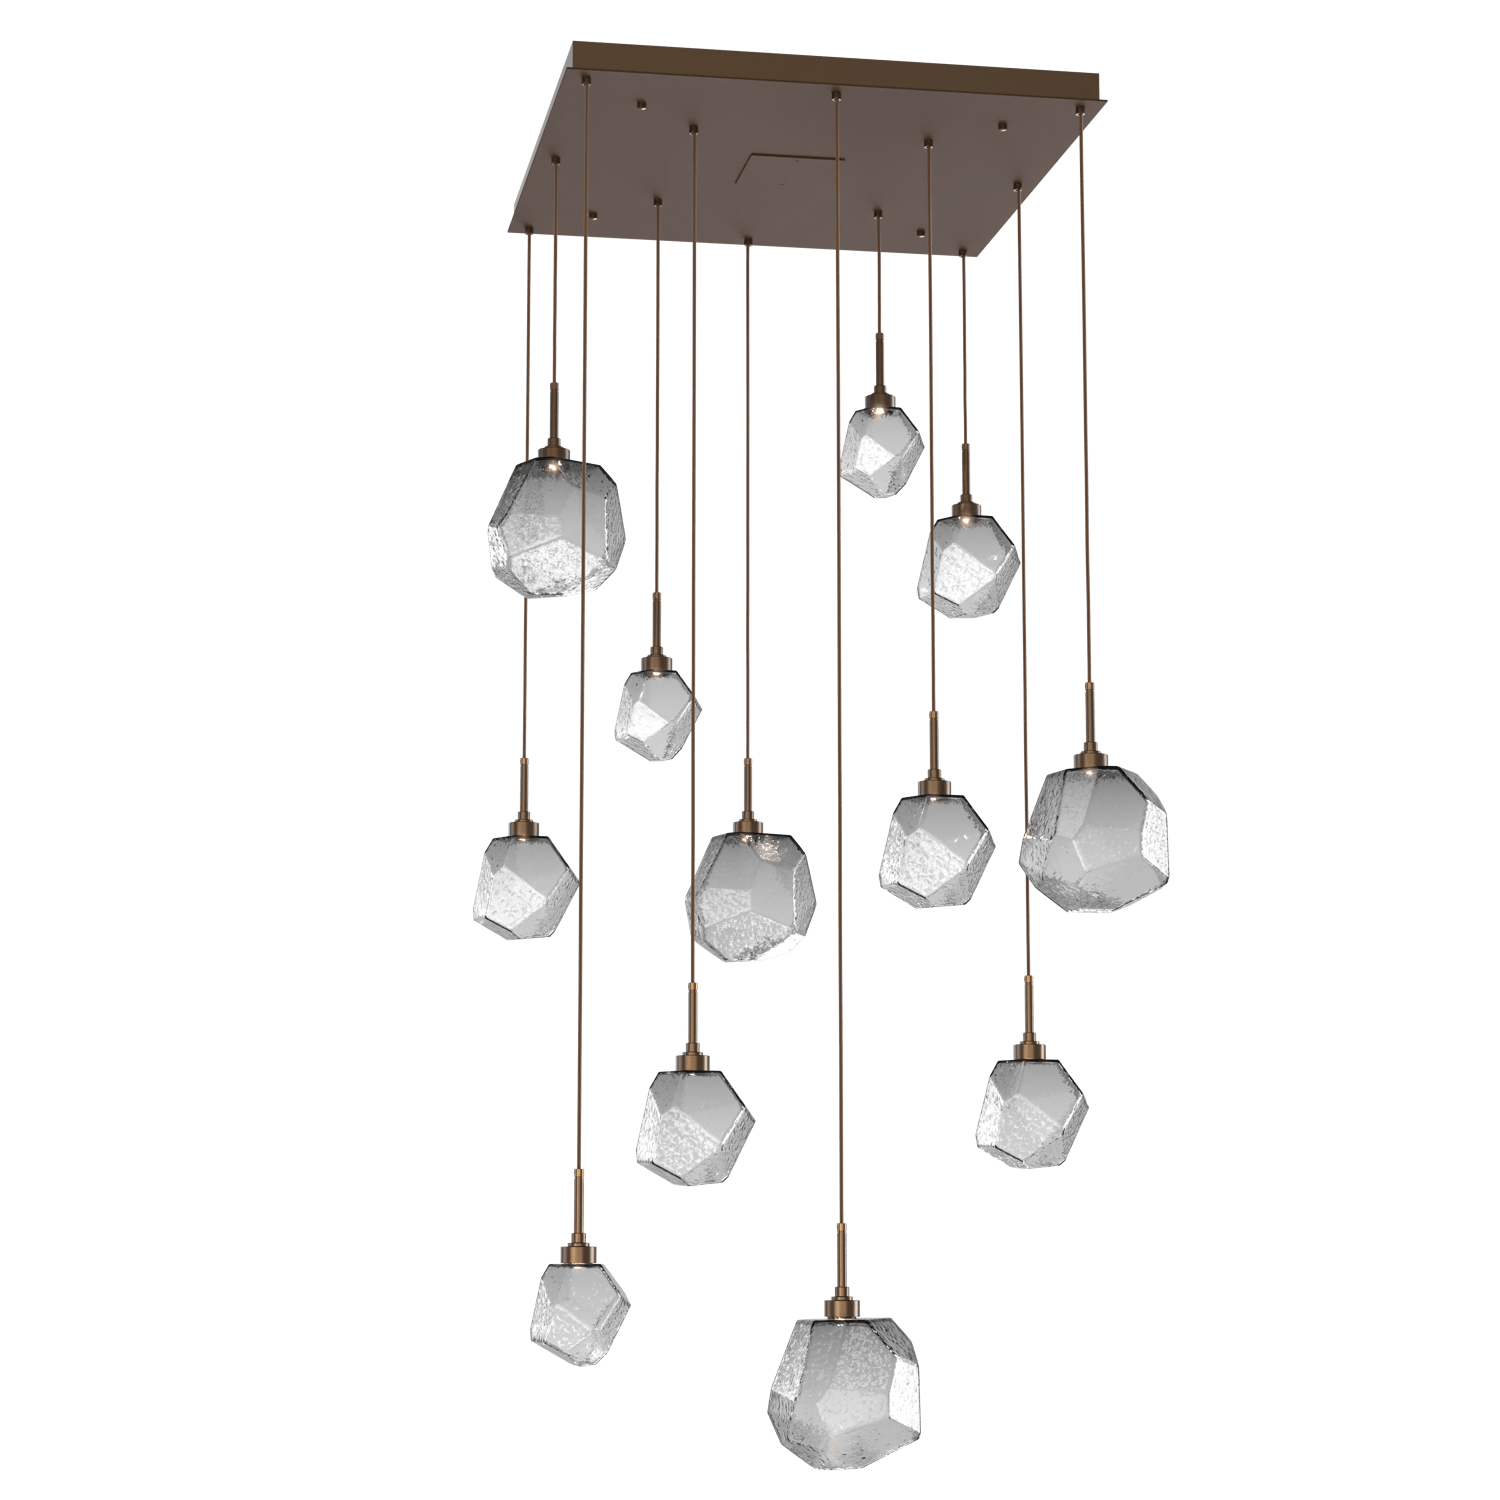 CHB0039-12-FB-S-Hammerton-Studio-Gem-12-light-square-pendant-chandelier-with-flat-bronze-finish-and-smoke-blown-glass-shades-and-LED-lamping